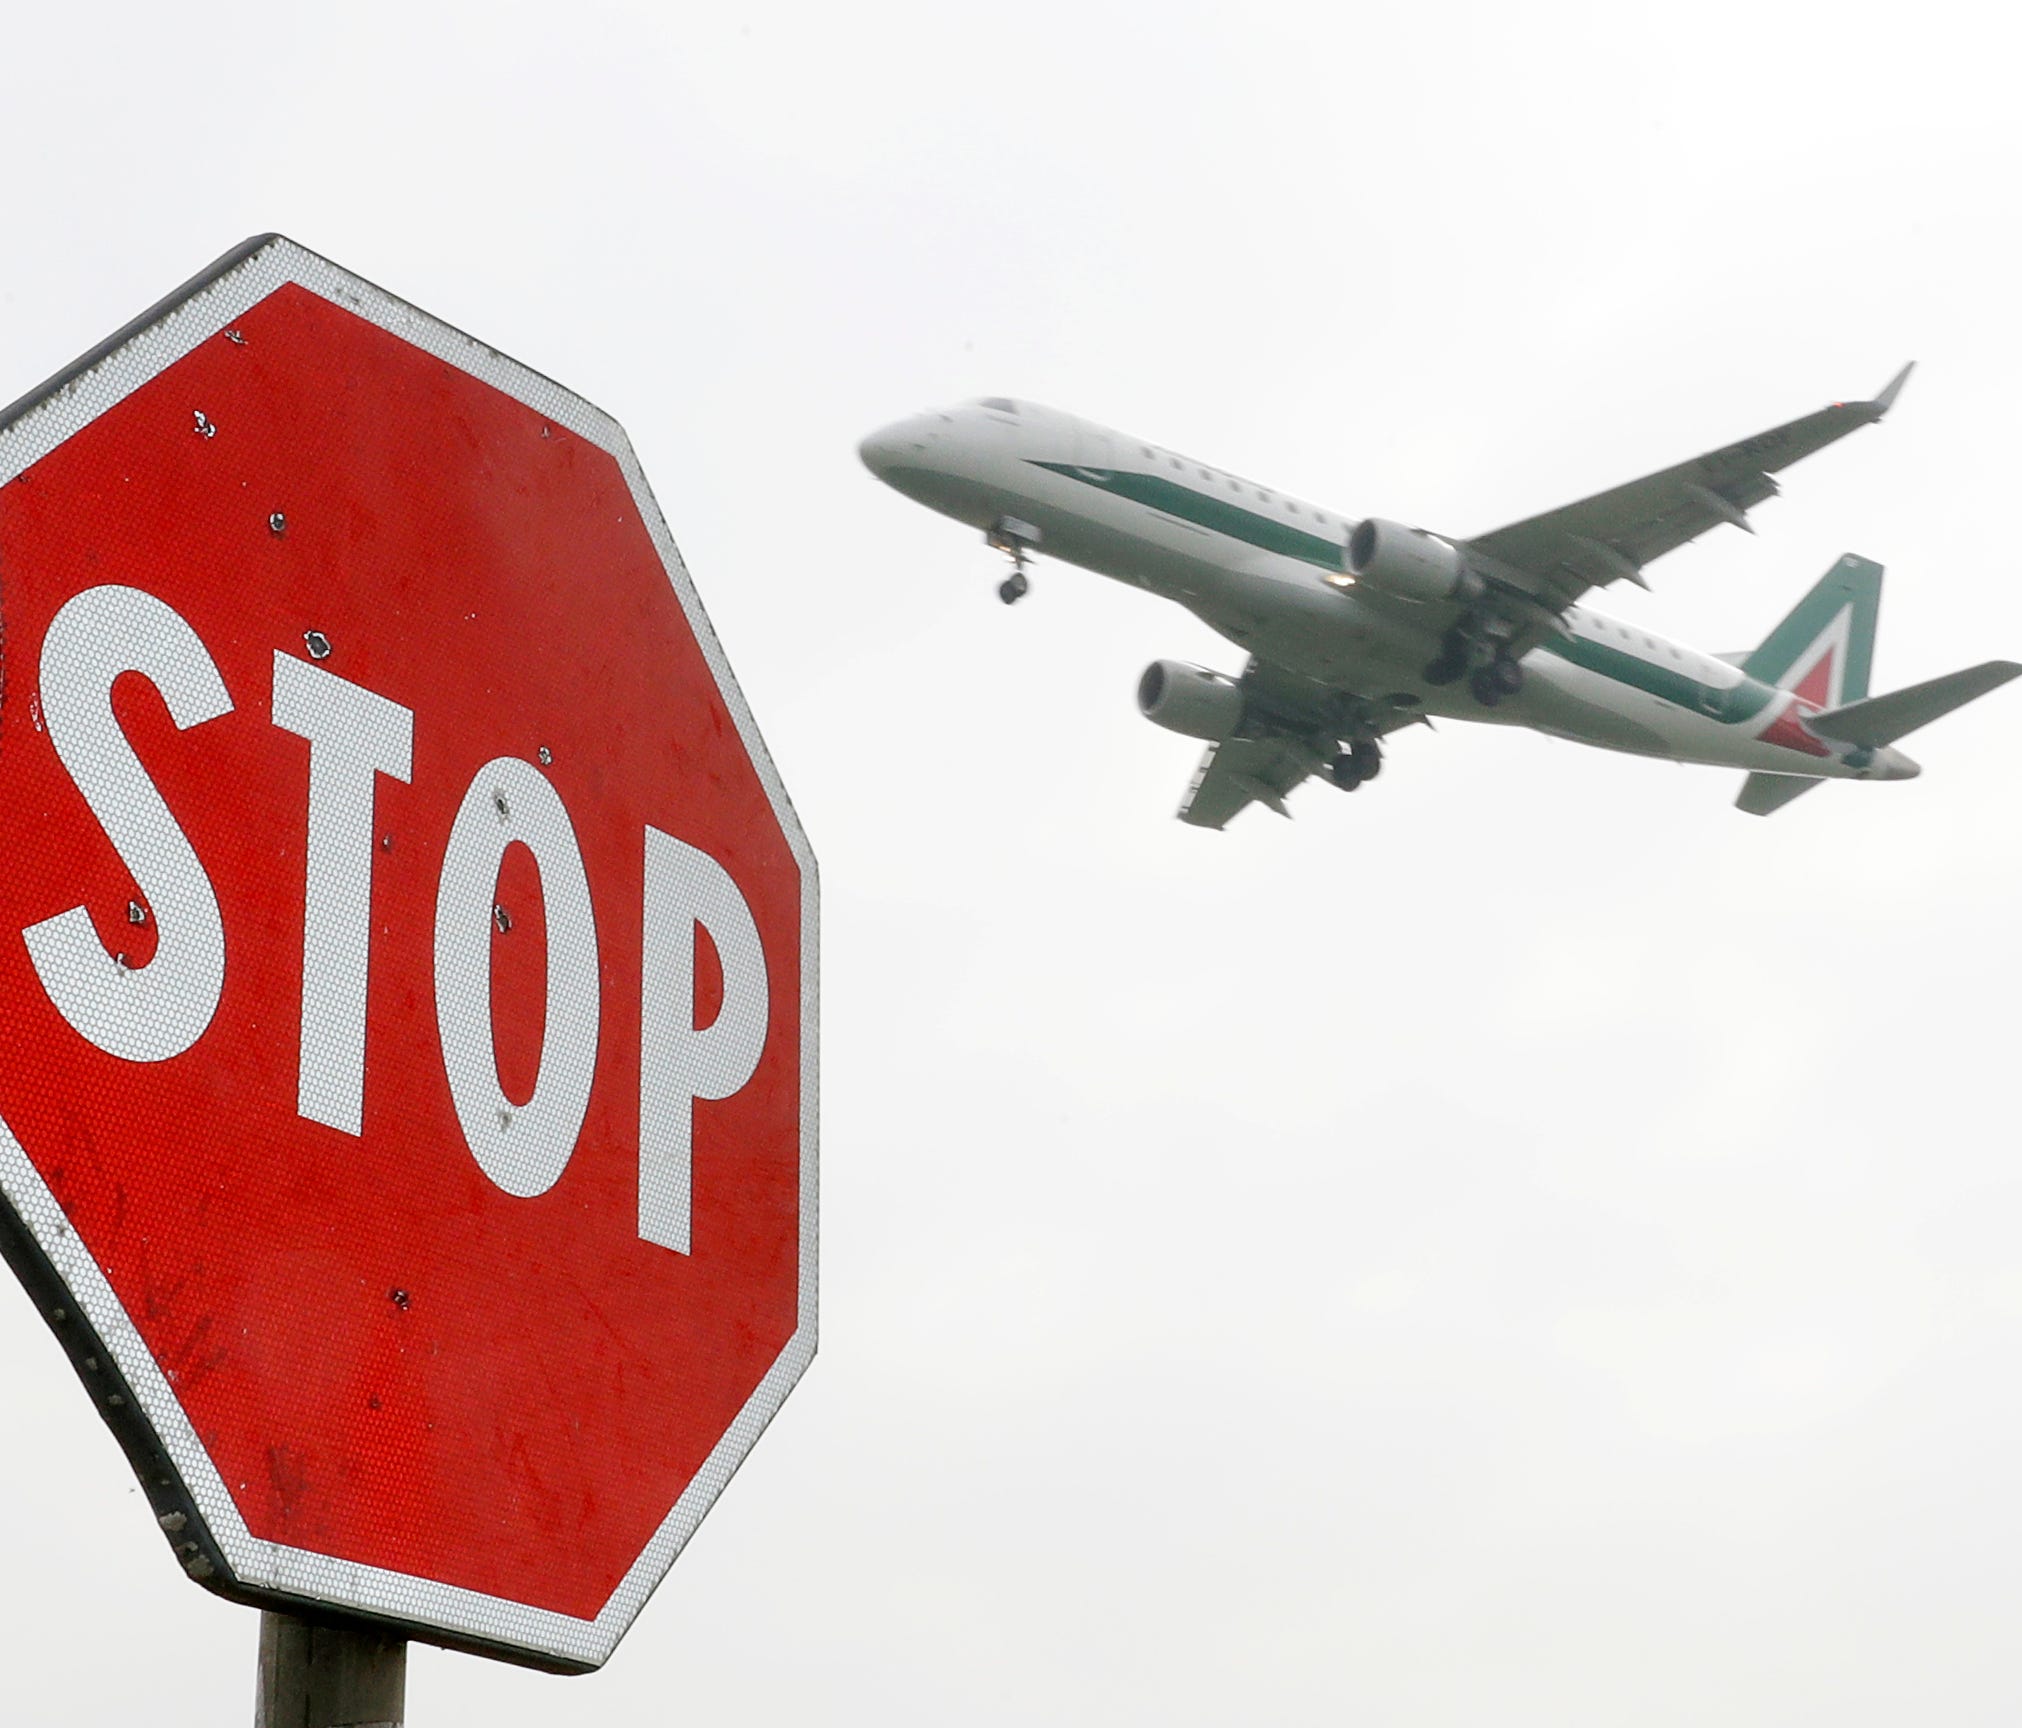 An Alitalia plane comes in for landing at Linate Airport, in Milan, Italy, on Monday, March 20, 2017.